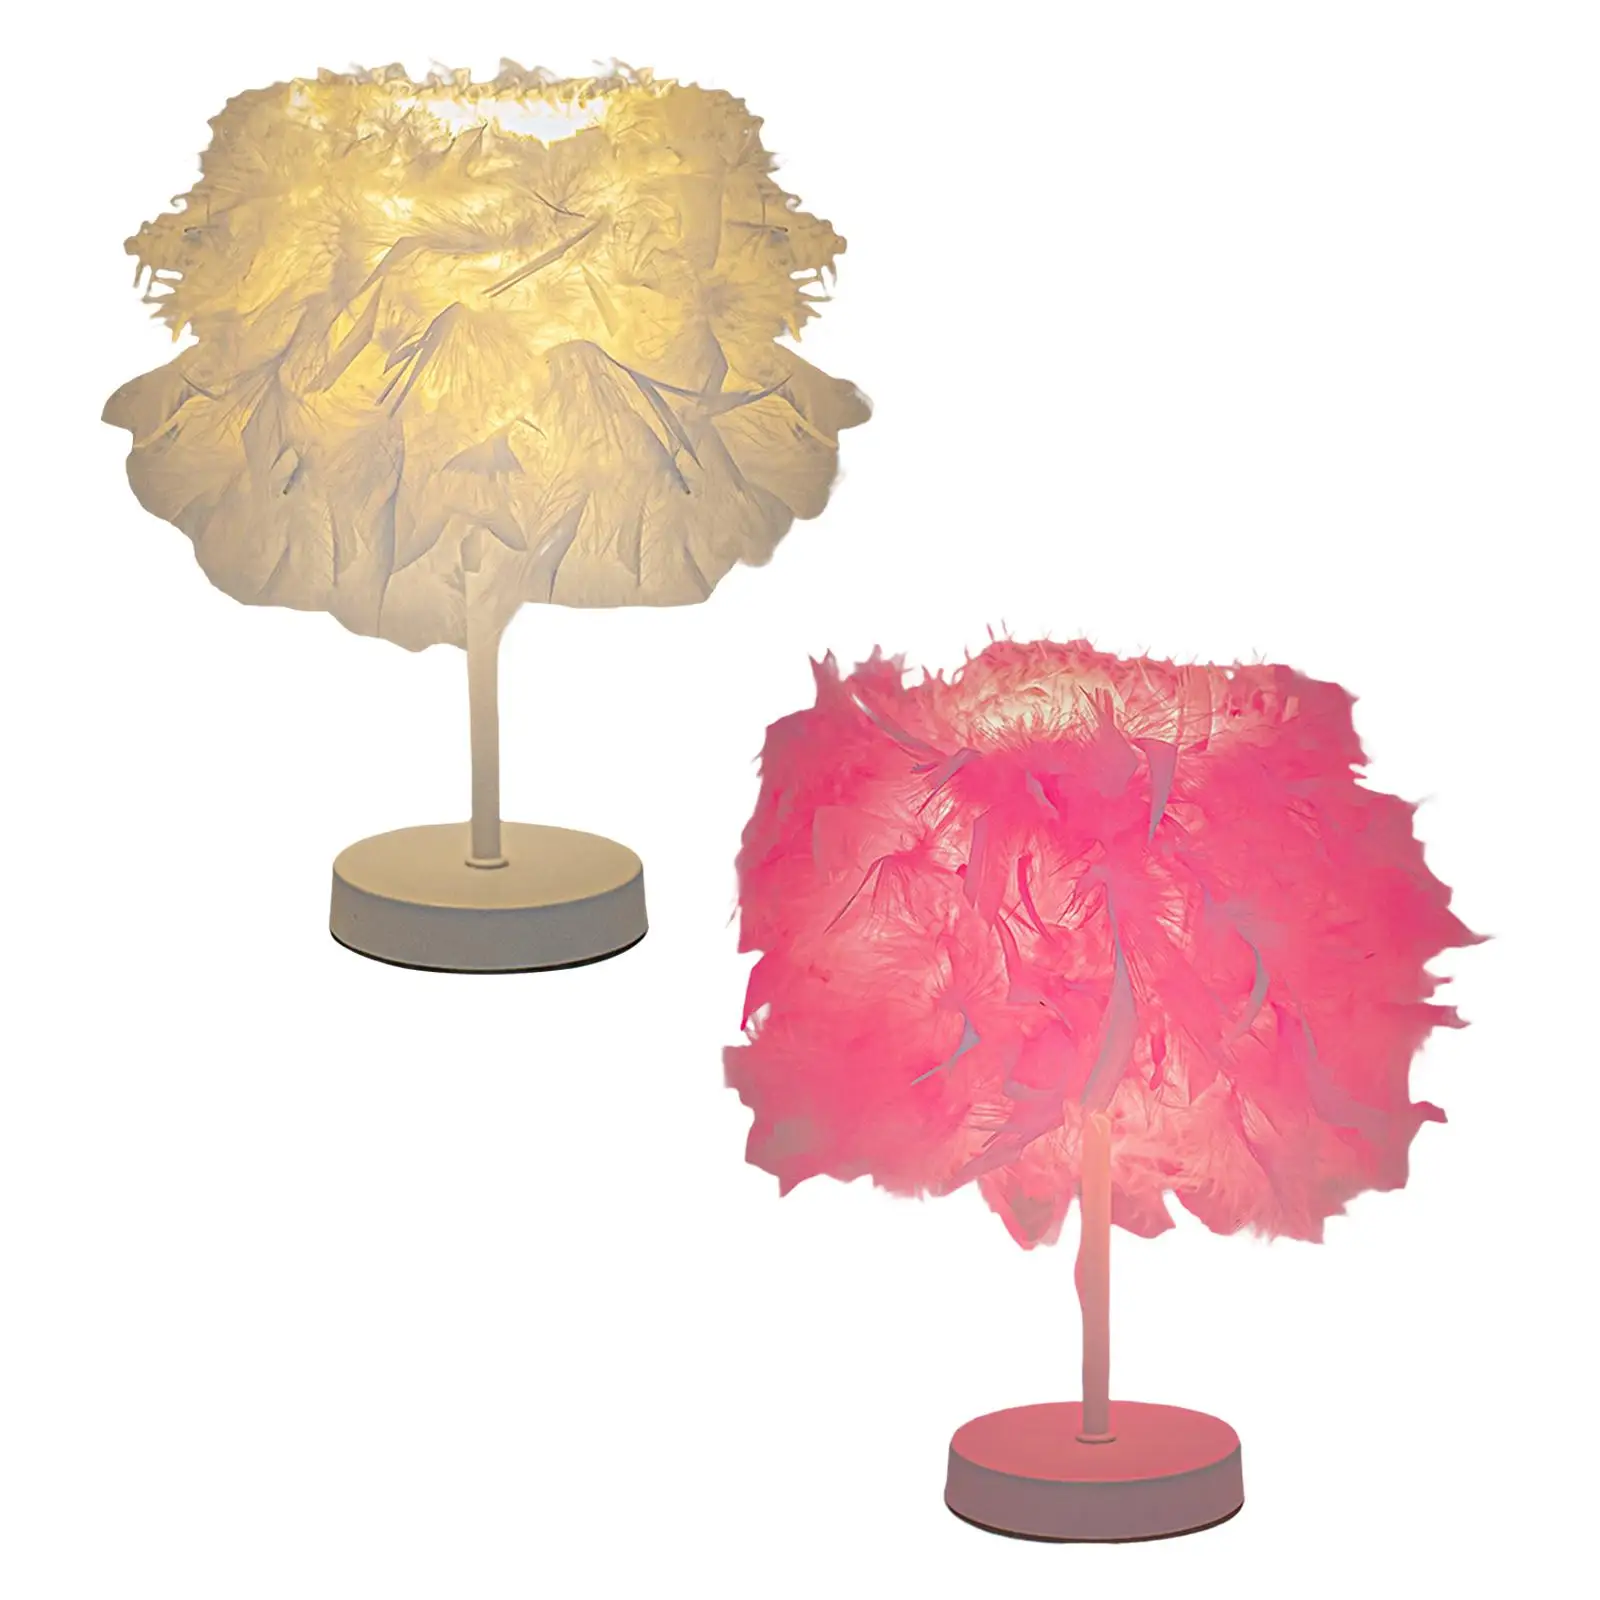 Romantic Feathers Table Lamp Decor Lantern Night Lights Desk Light for Guest Room Bedroom Wedding New Year Party